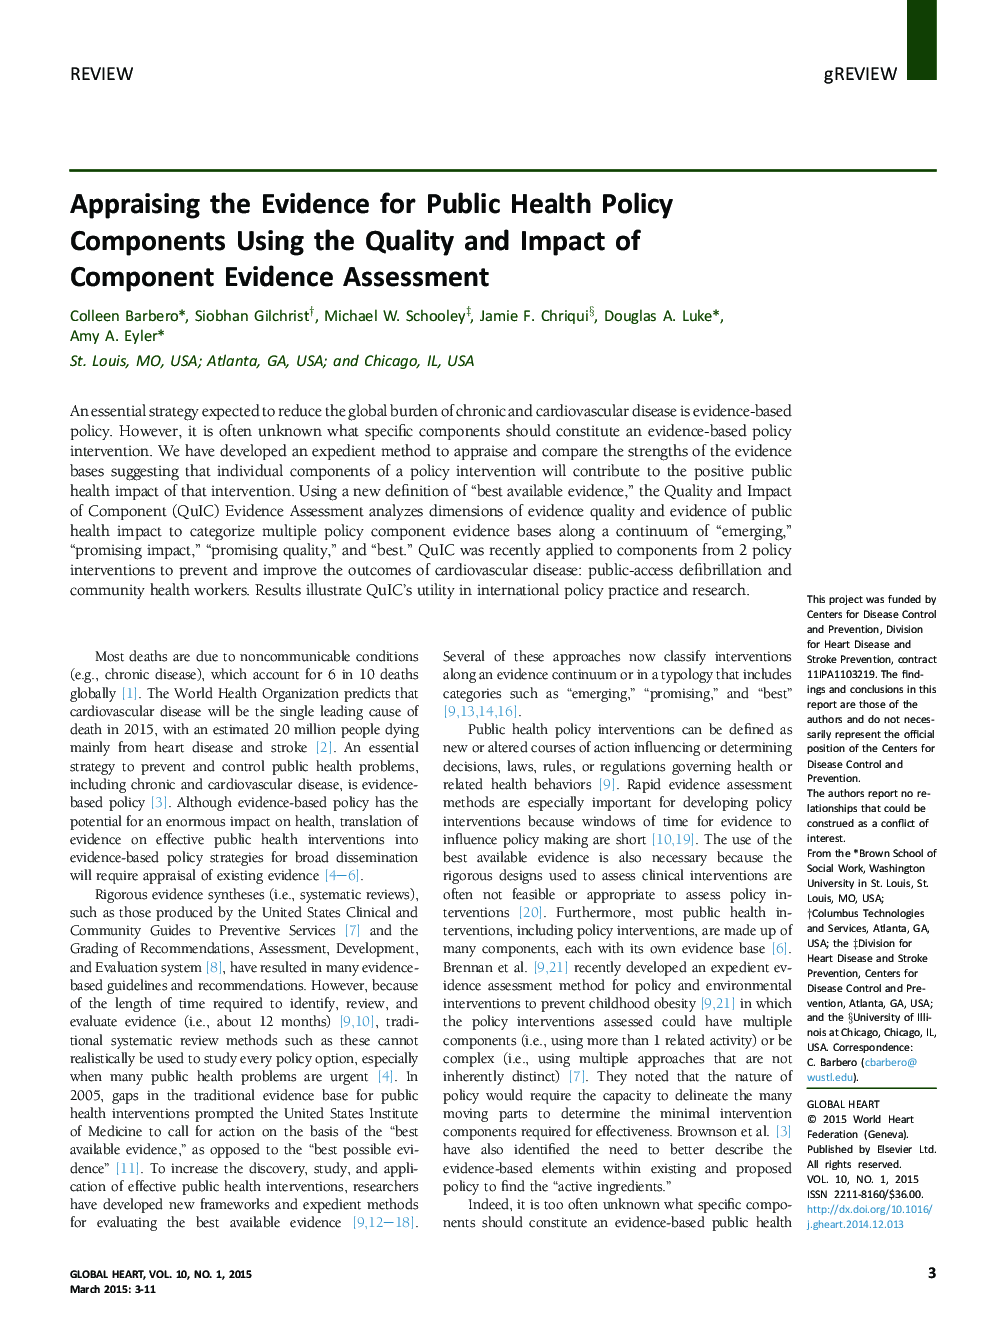 Appraising the Evidence for Public Health Policy Components Using the Quality and Impact of Component Evidence Assessment 